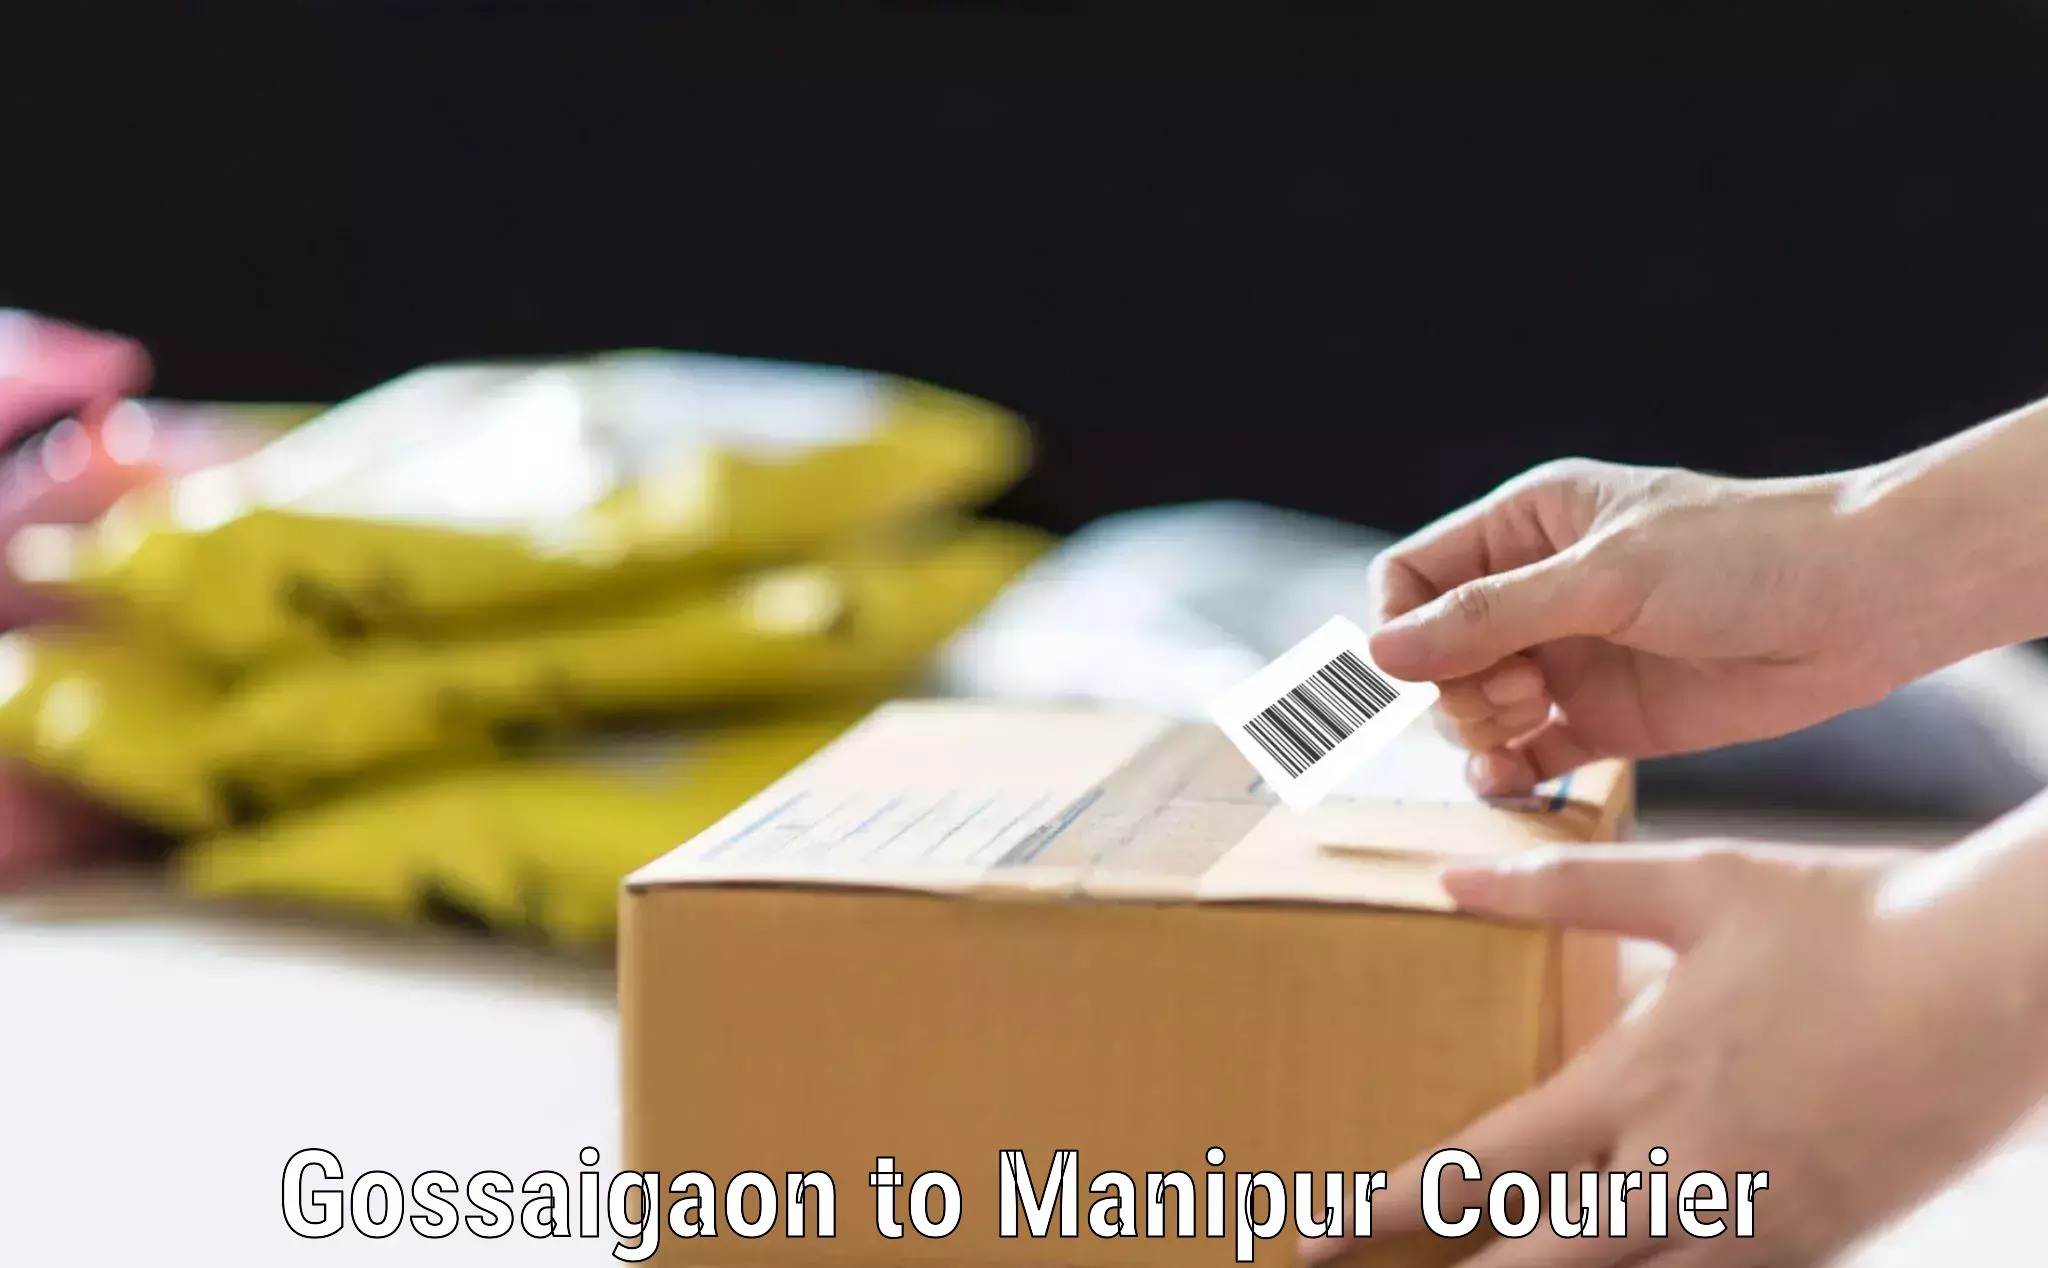 Luggage shipment specialists Gossaigaon to Manipur